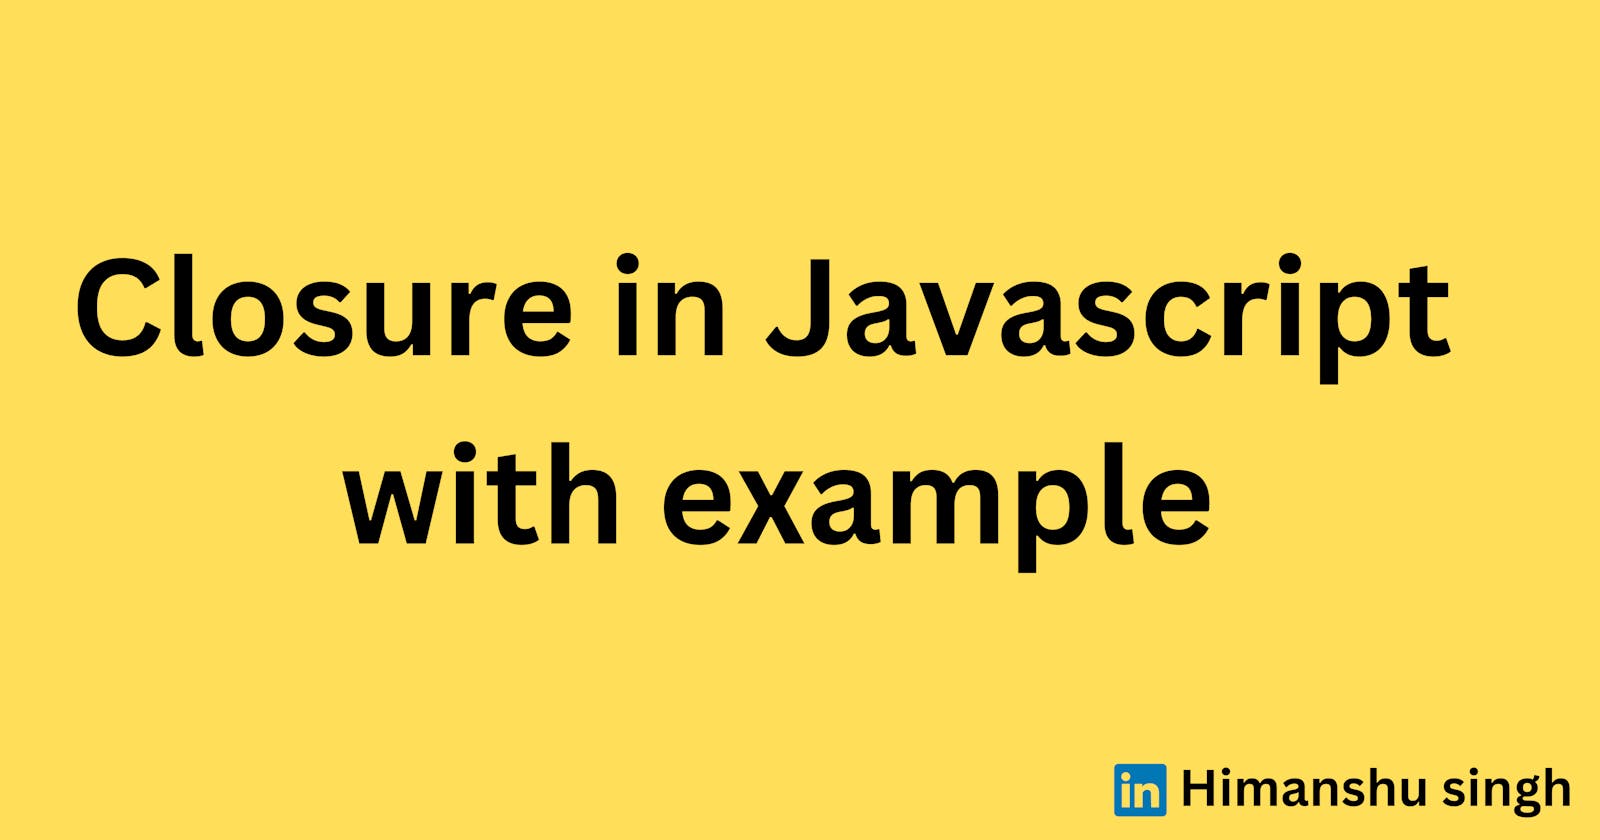 Closure in Javascript with example